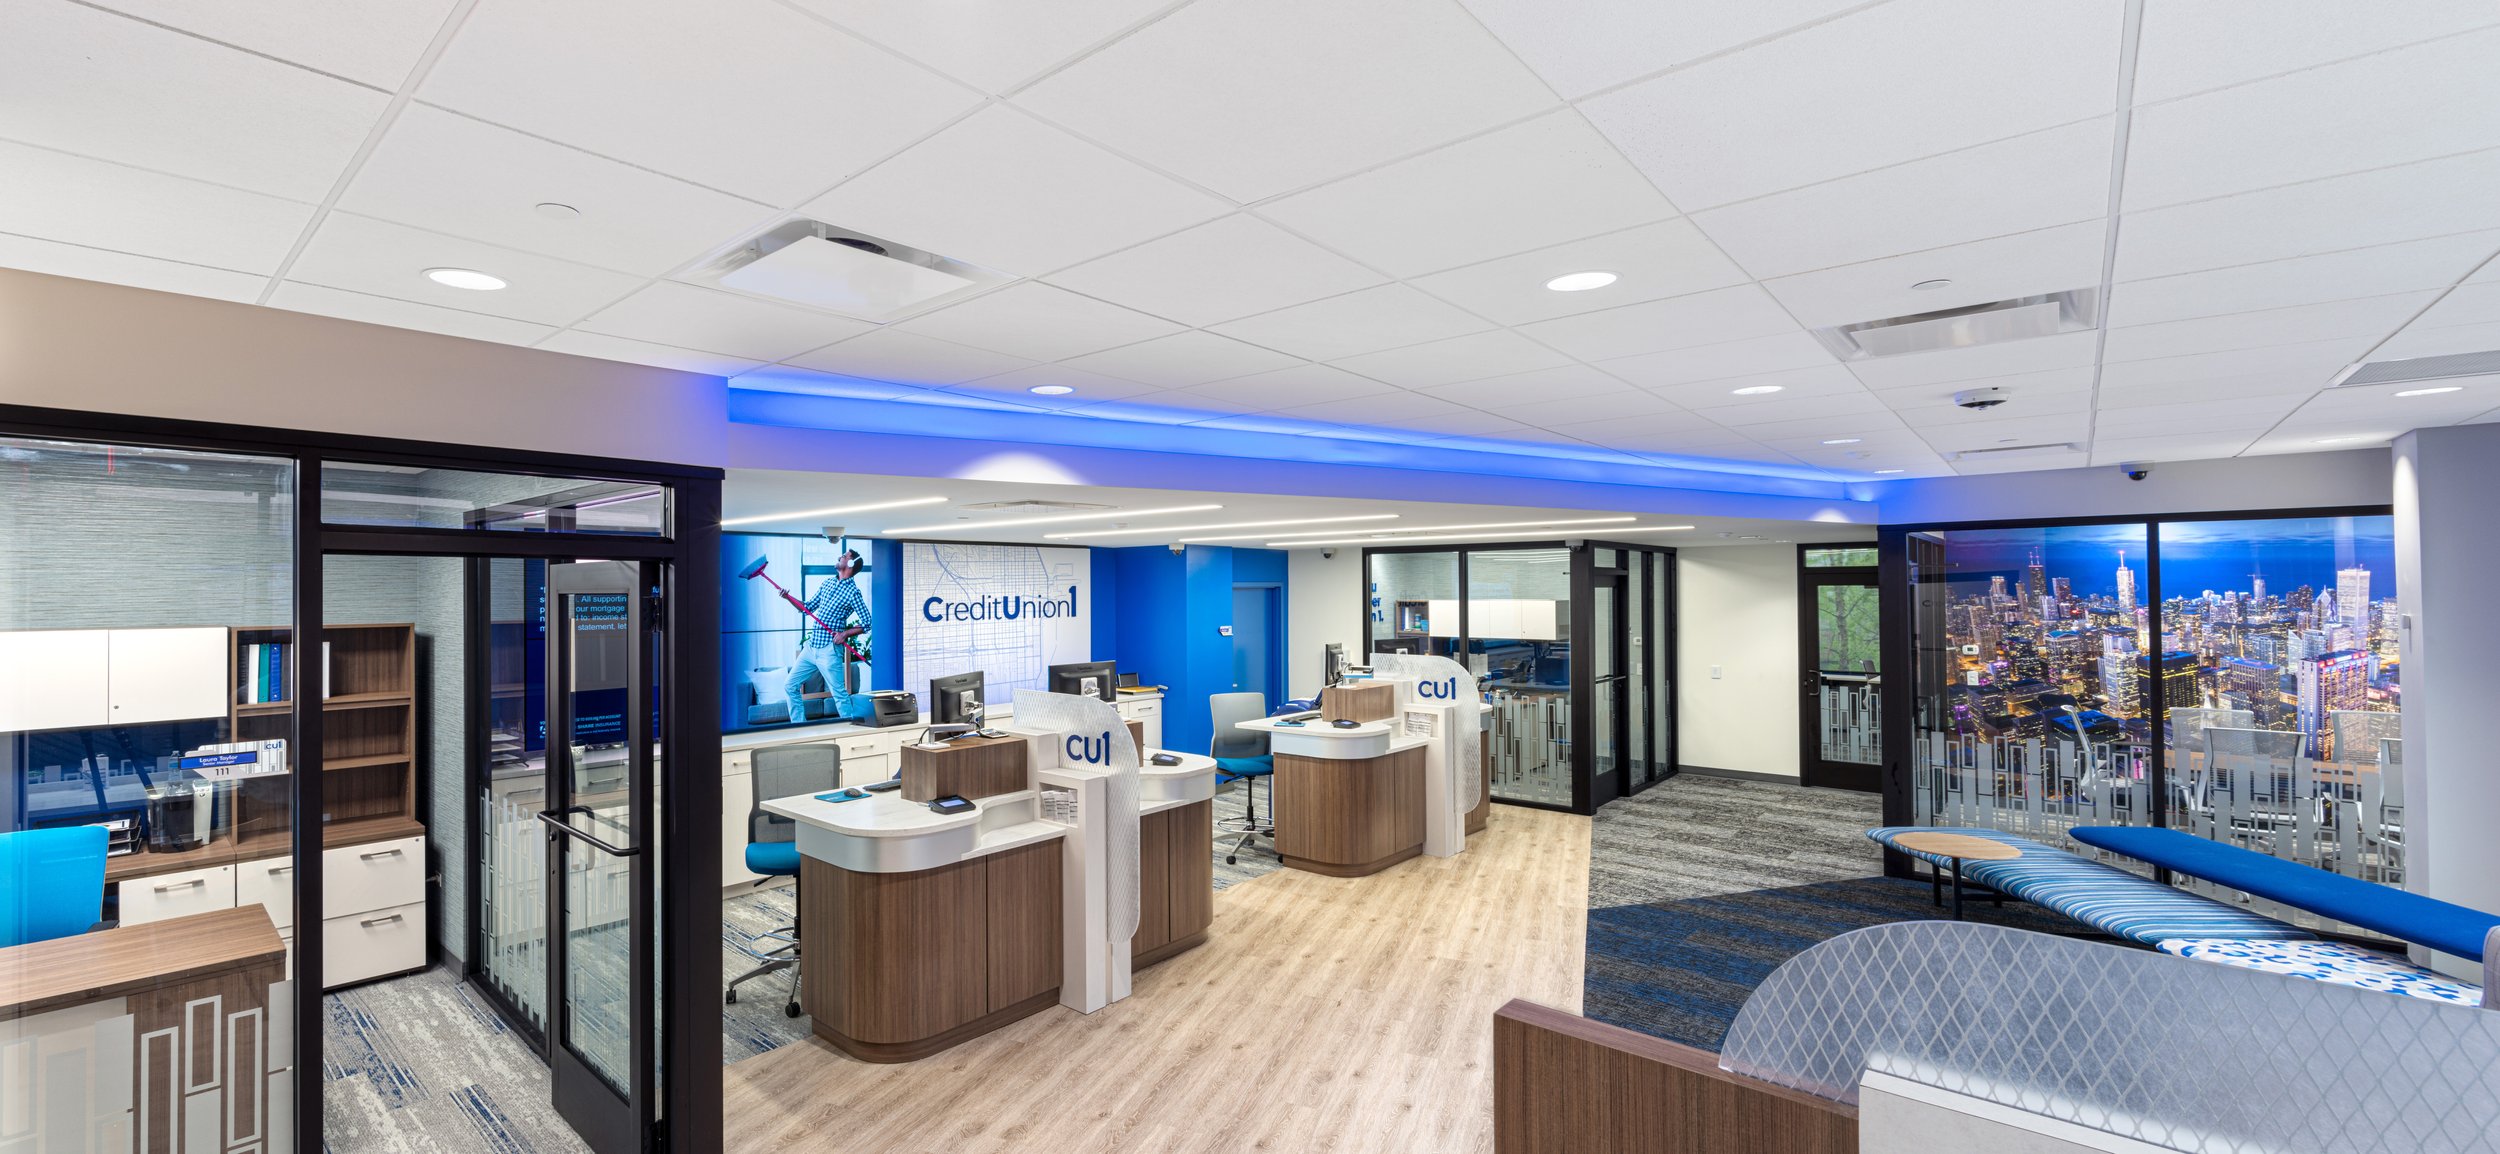 Interior photography of the Credit Union building in Illinois.